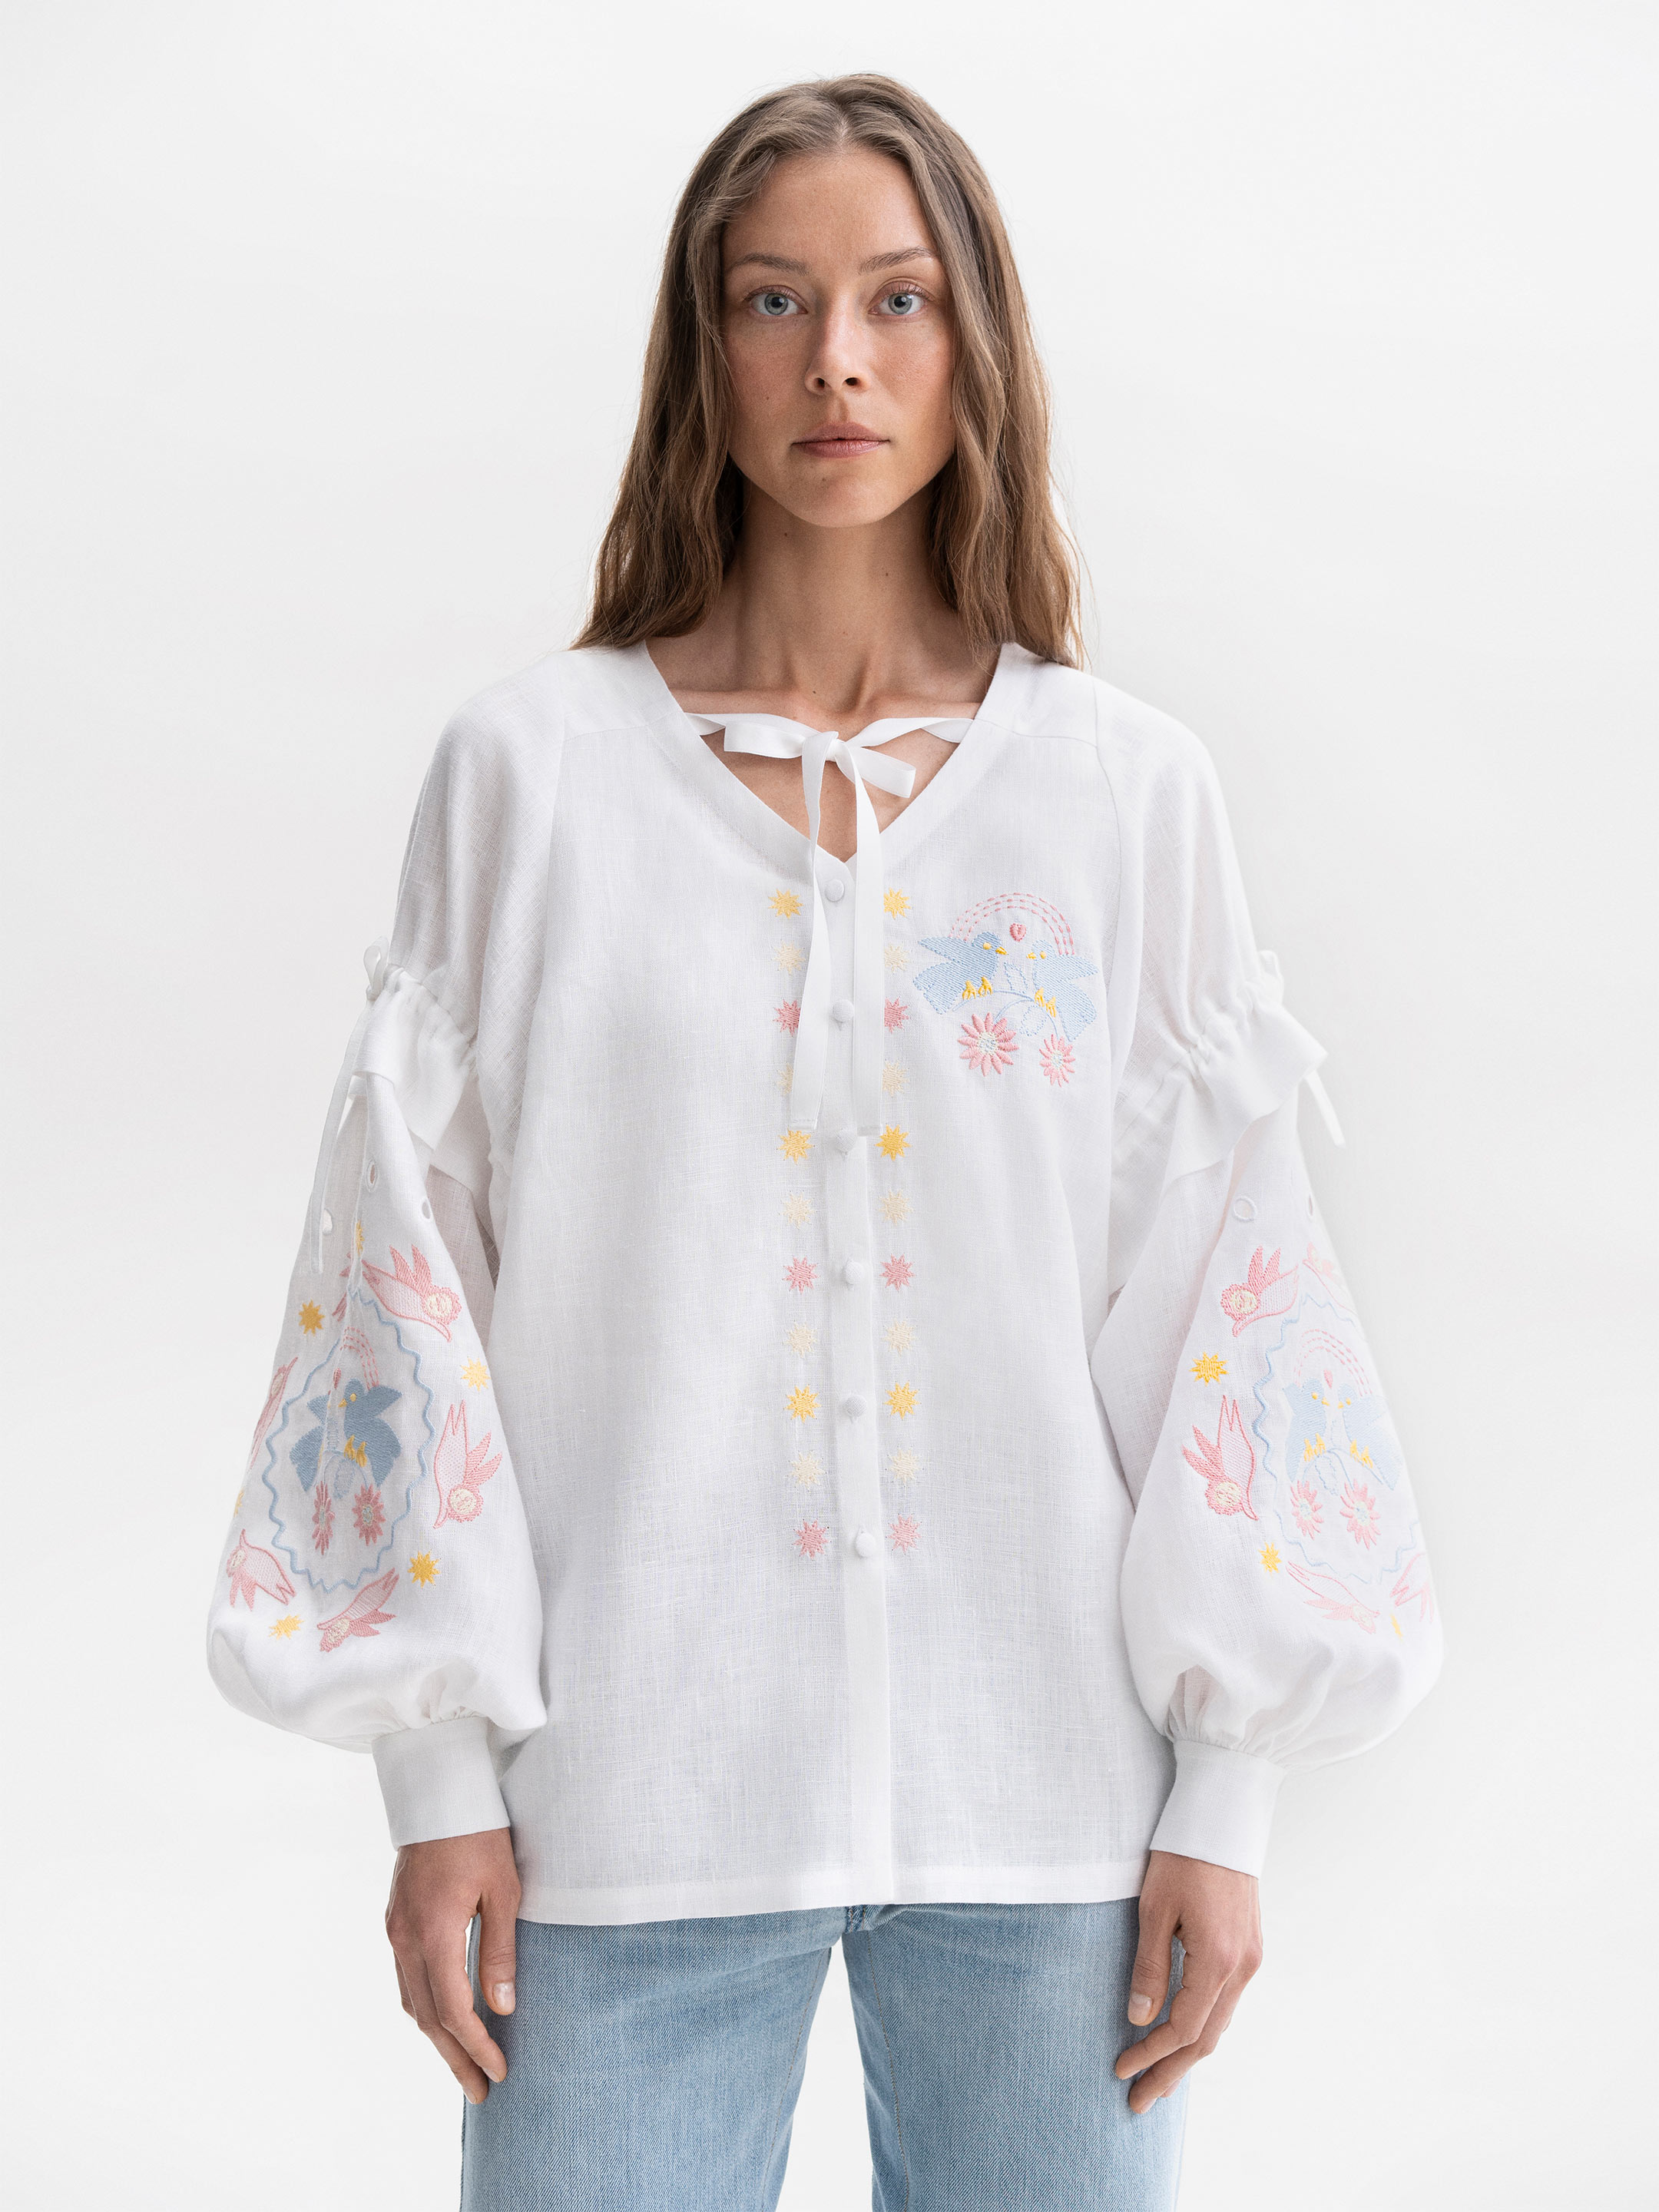 White embroidered shirt with colorful embroidery Polina - photo 1